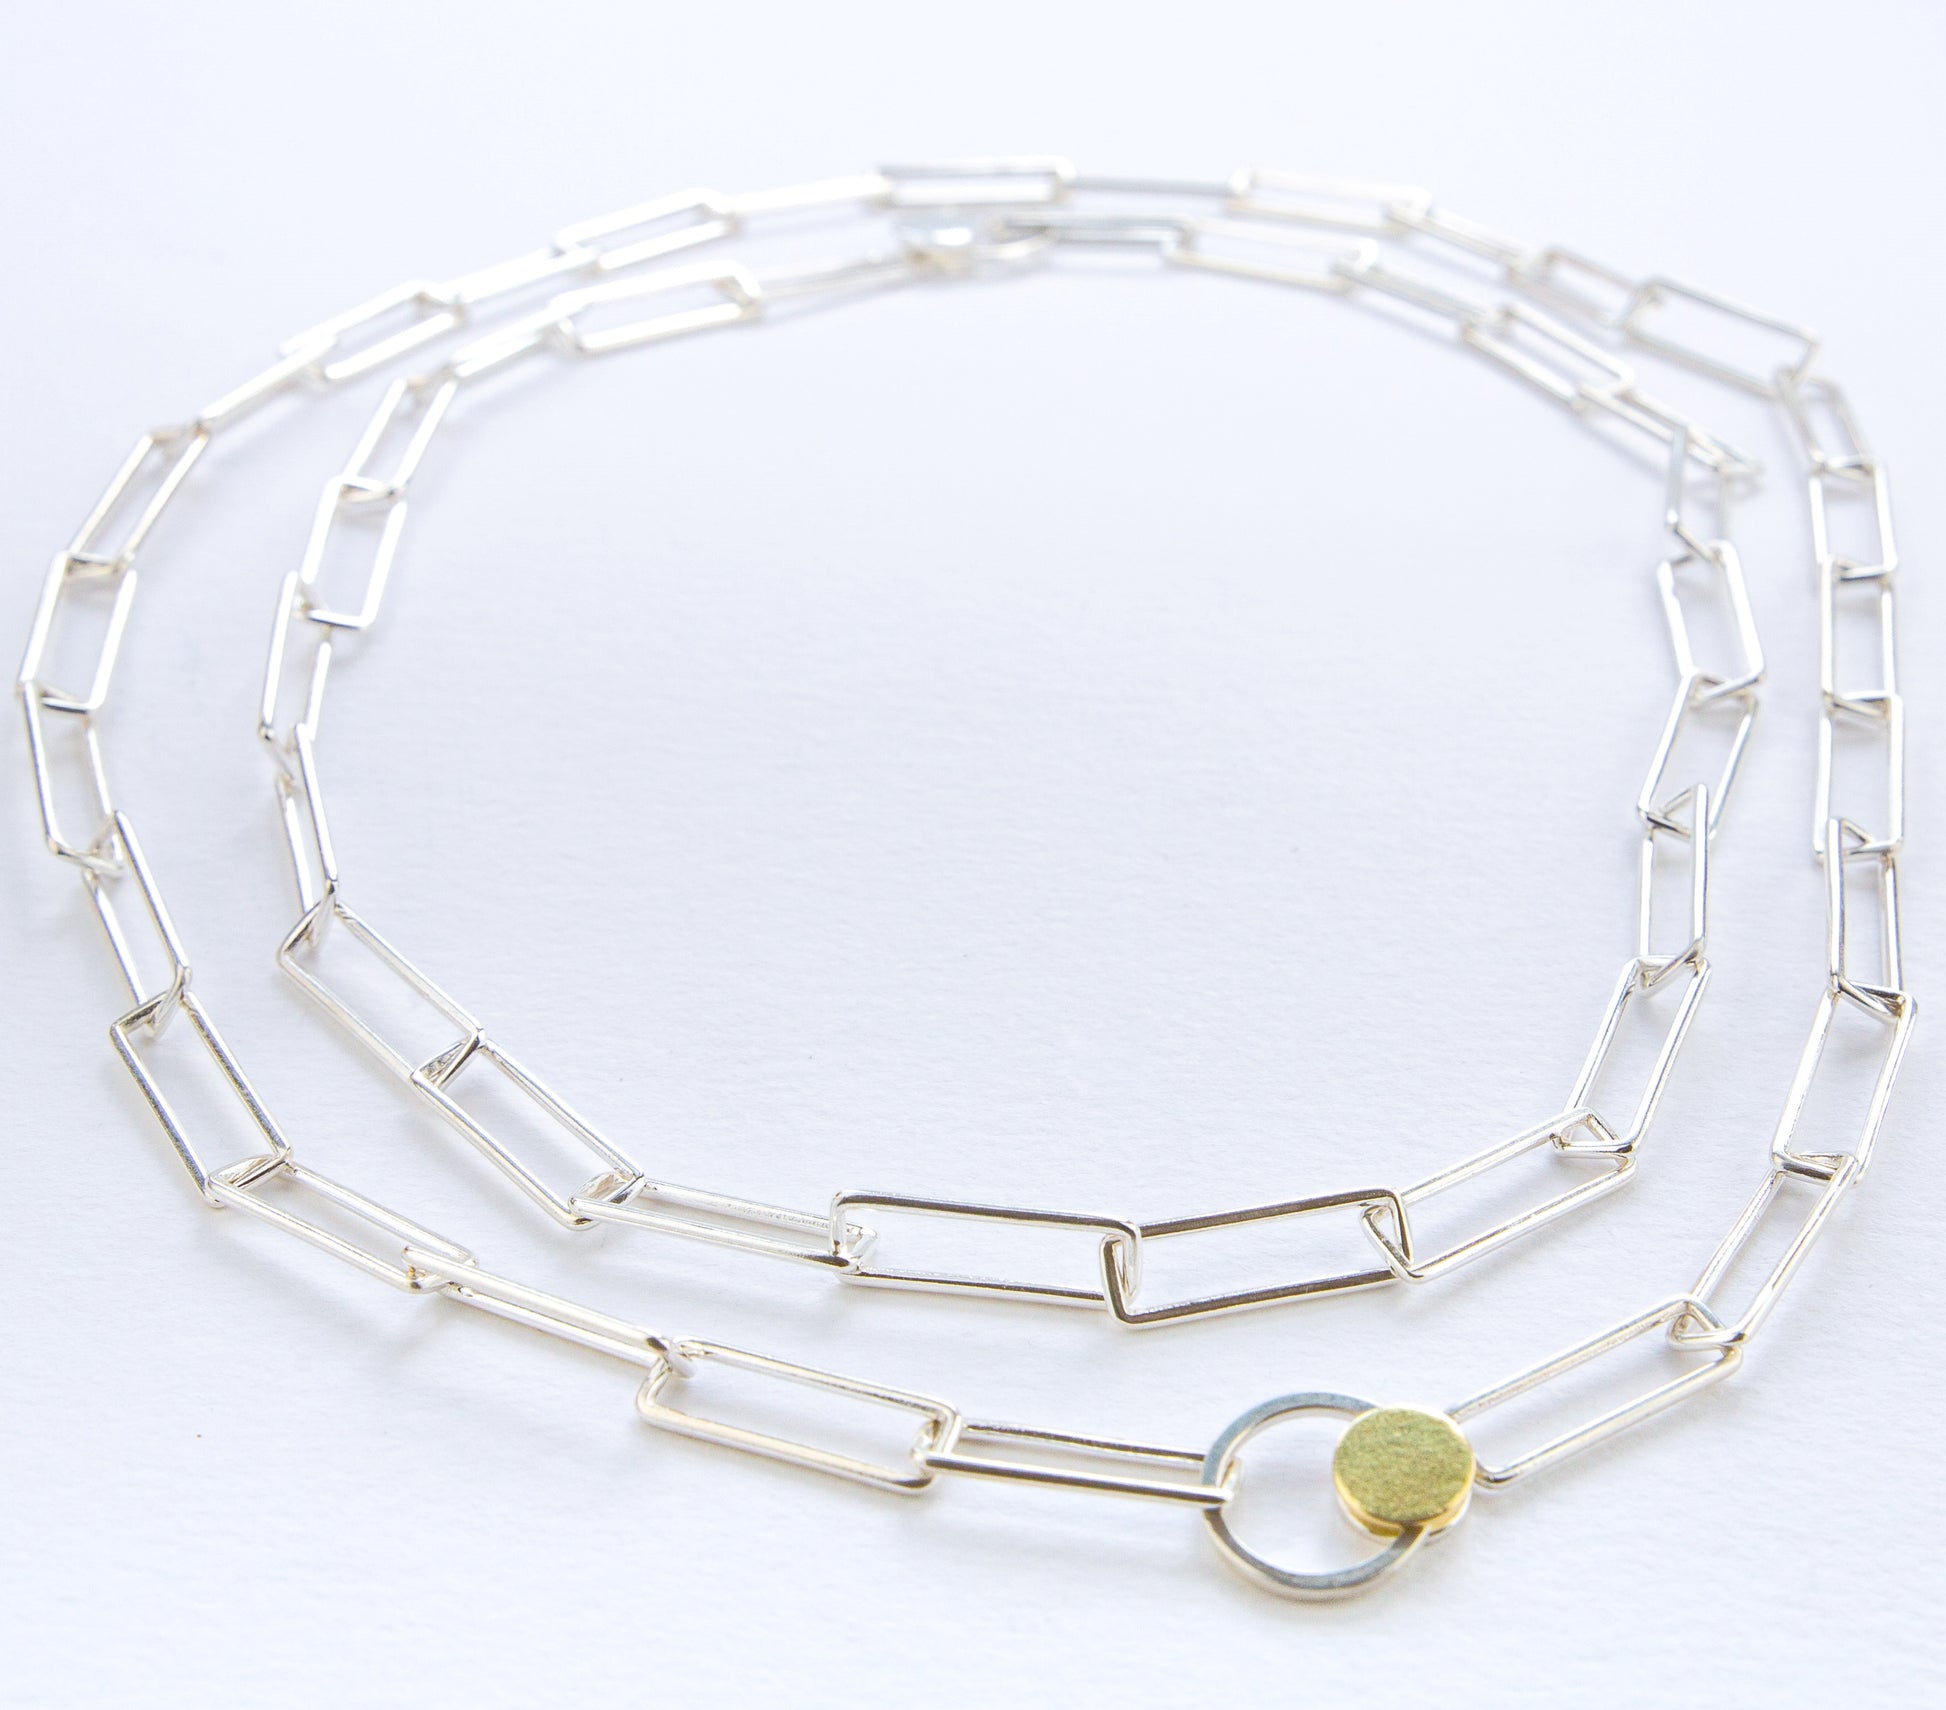 Orbit necklace with distinctive clasp in silver and gold www.barbaraspence.co.uk